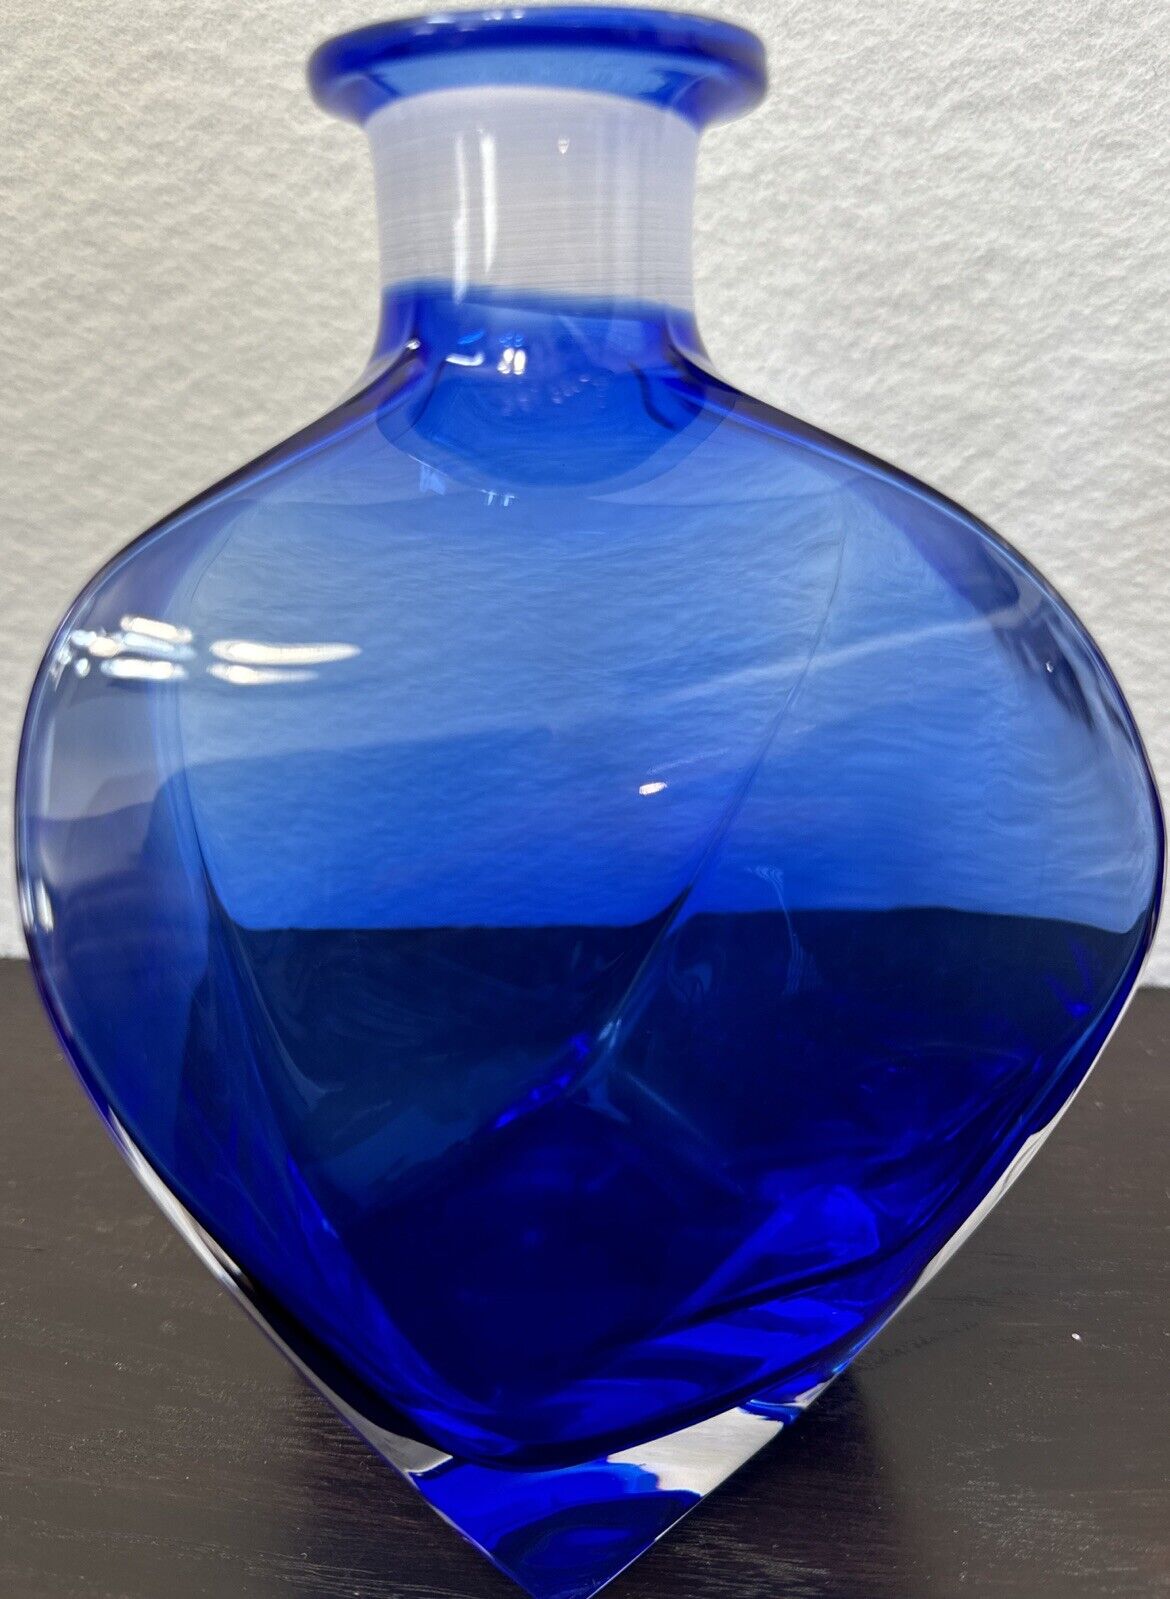 Square Shaped, Slightly Twisted Cobalt Blue Glass Decanter No Stopper. Italian.